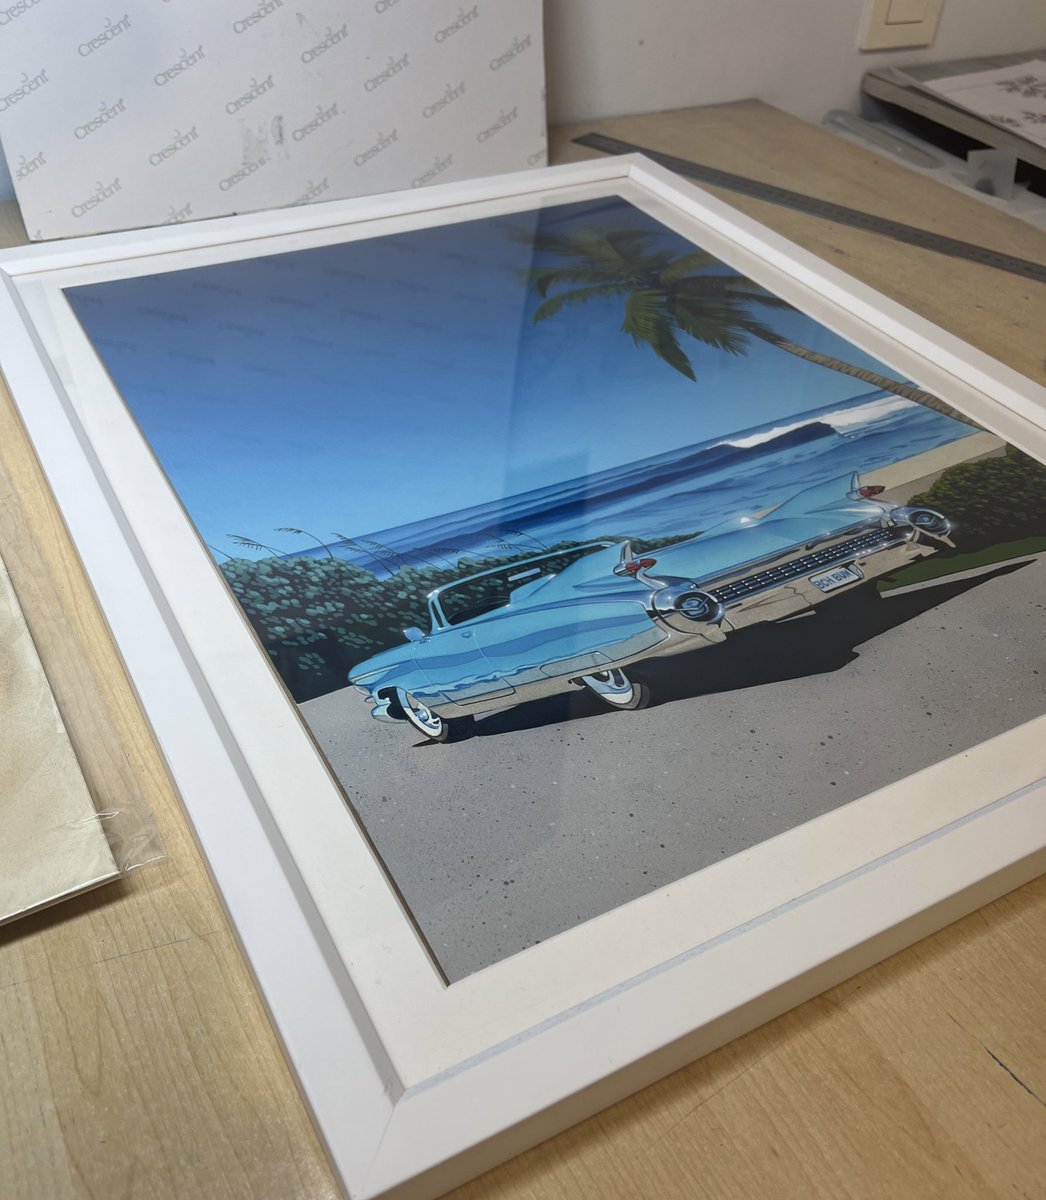 Already framed 🌊🥤🌴 ready to be purchased!
#retroart #synthwave #outrun #80saesthetic #retroartist